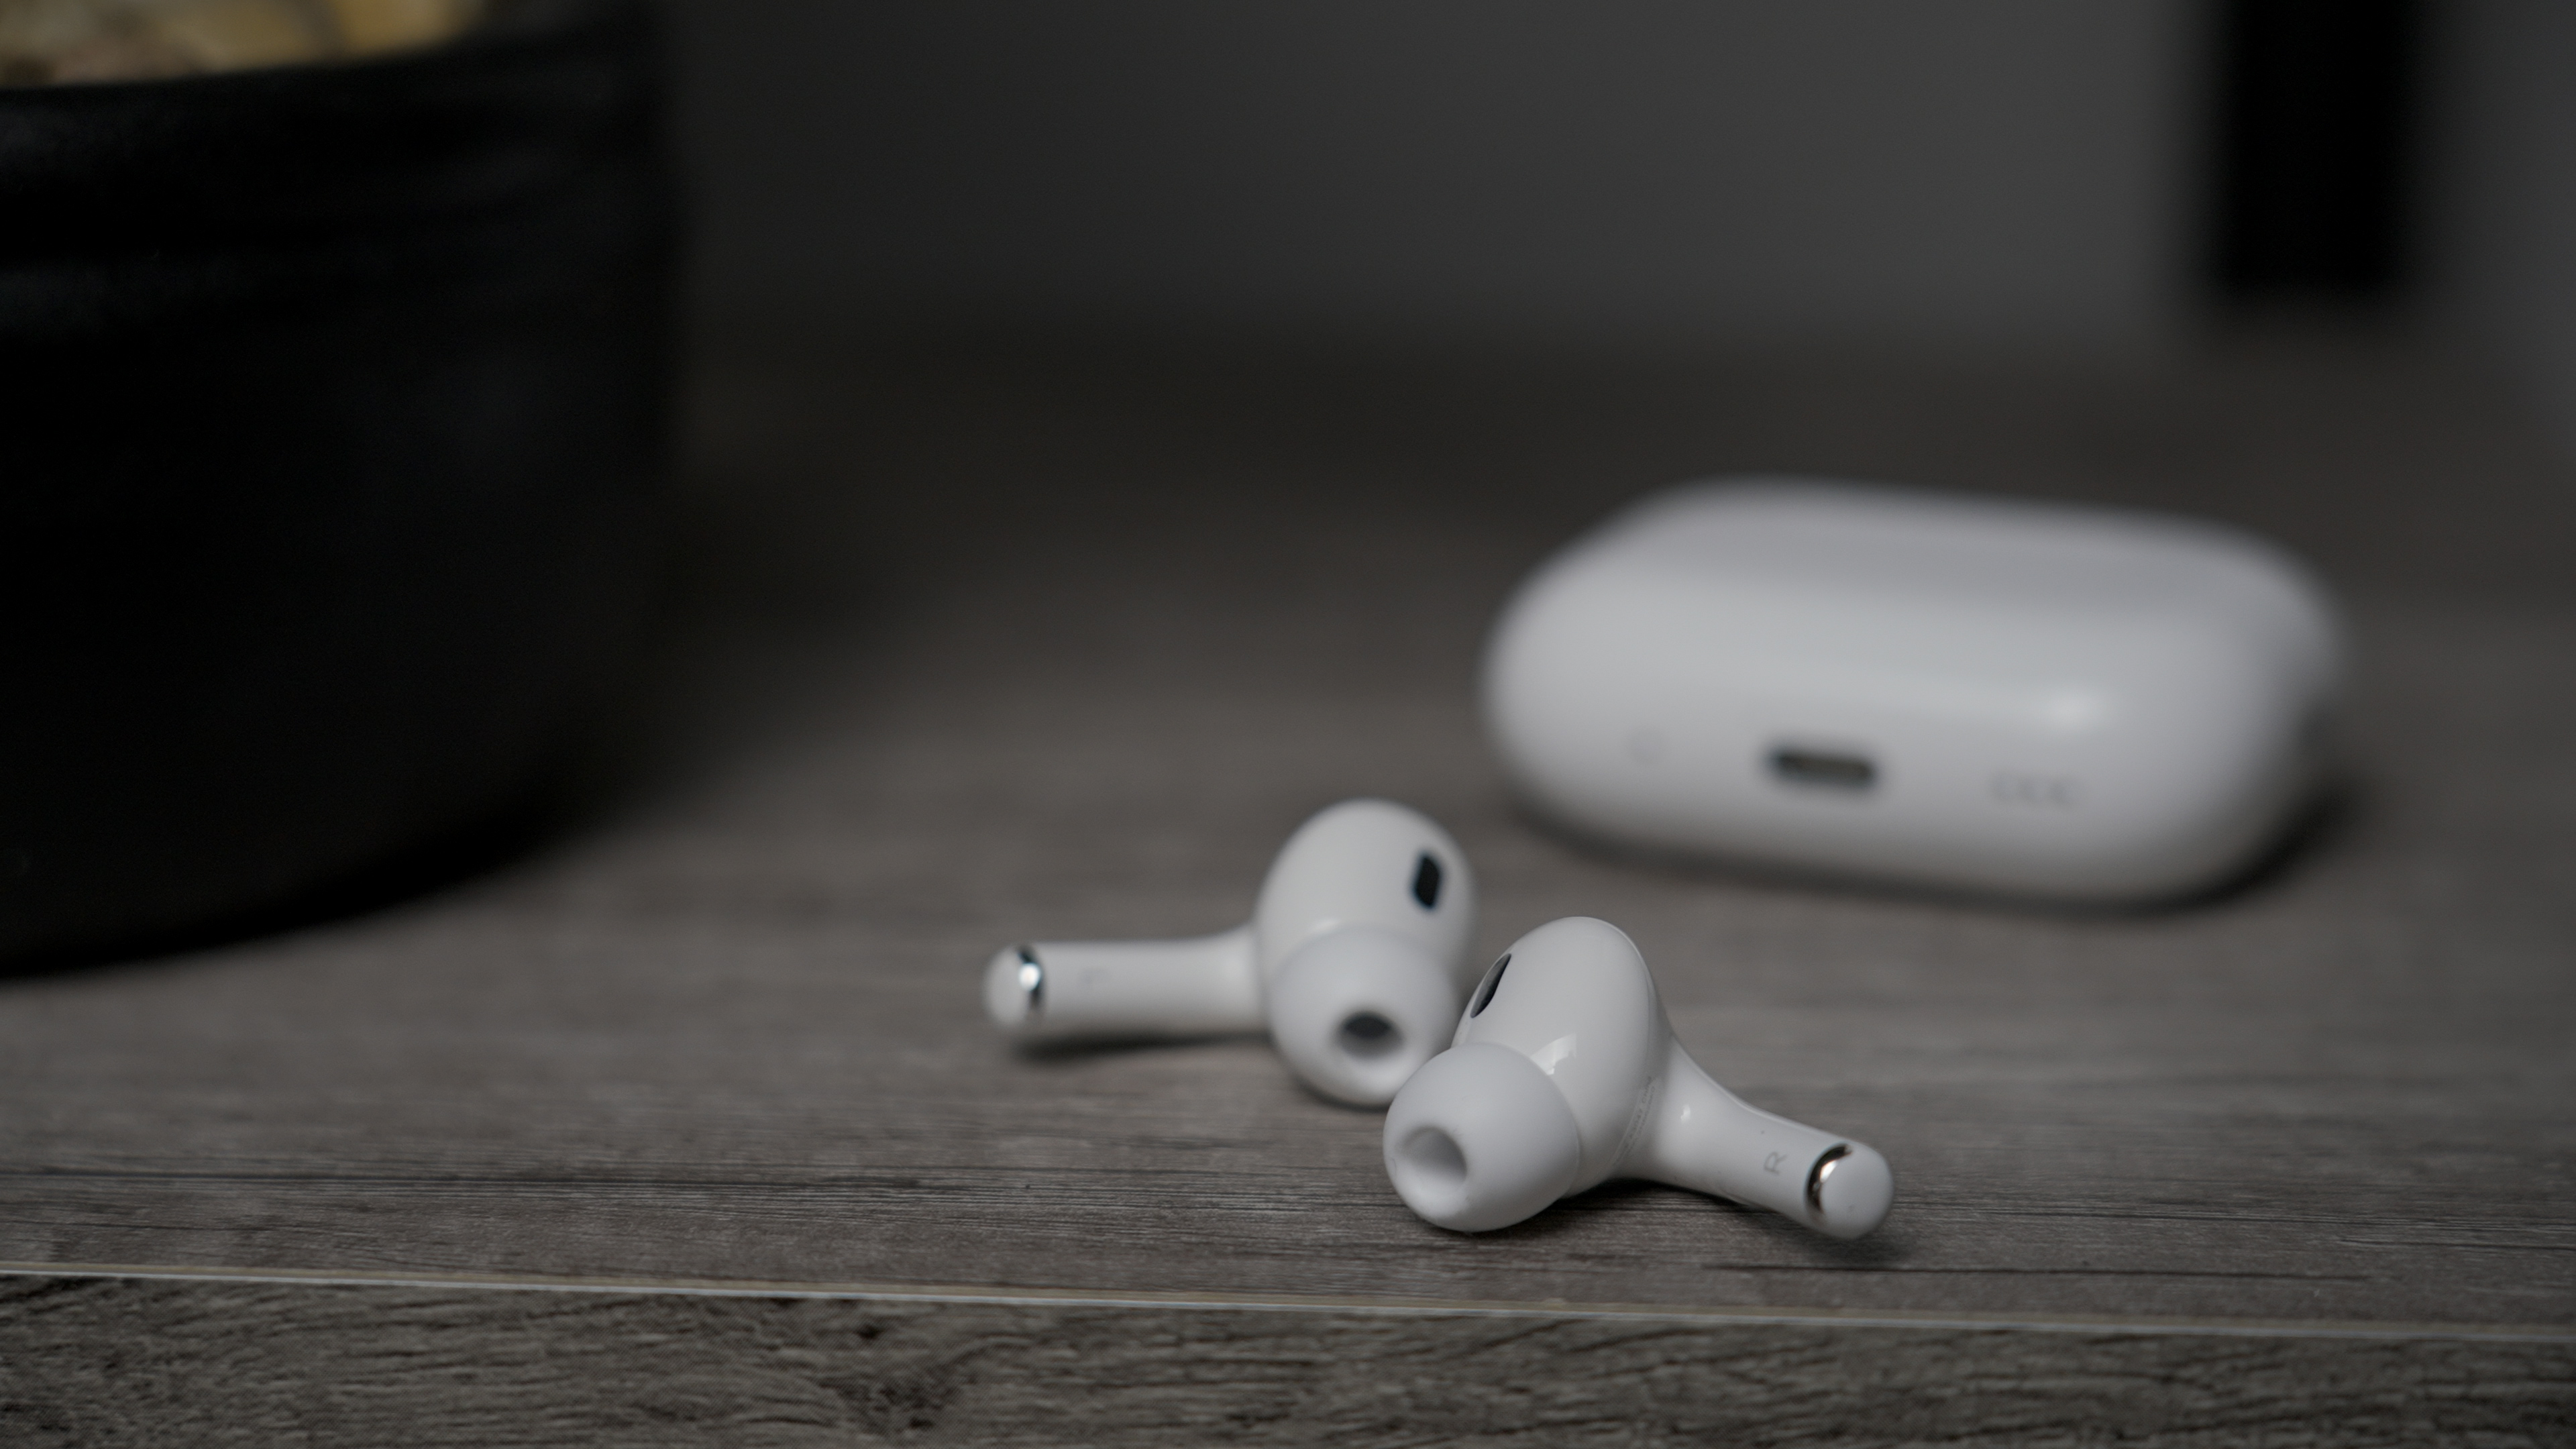 The Apple AirPods Pro 2 with USB-C and MagSafe buds on a table with case in the background.